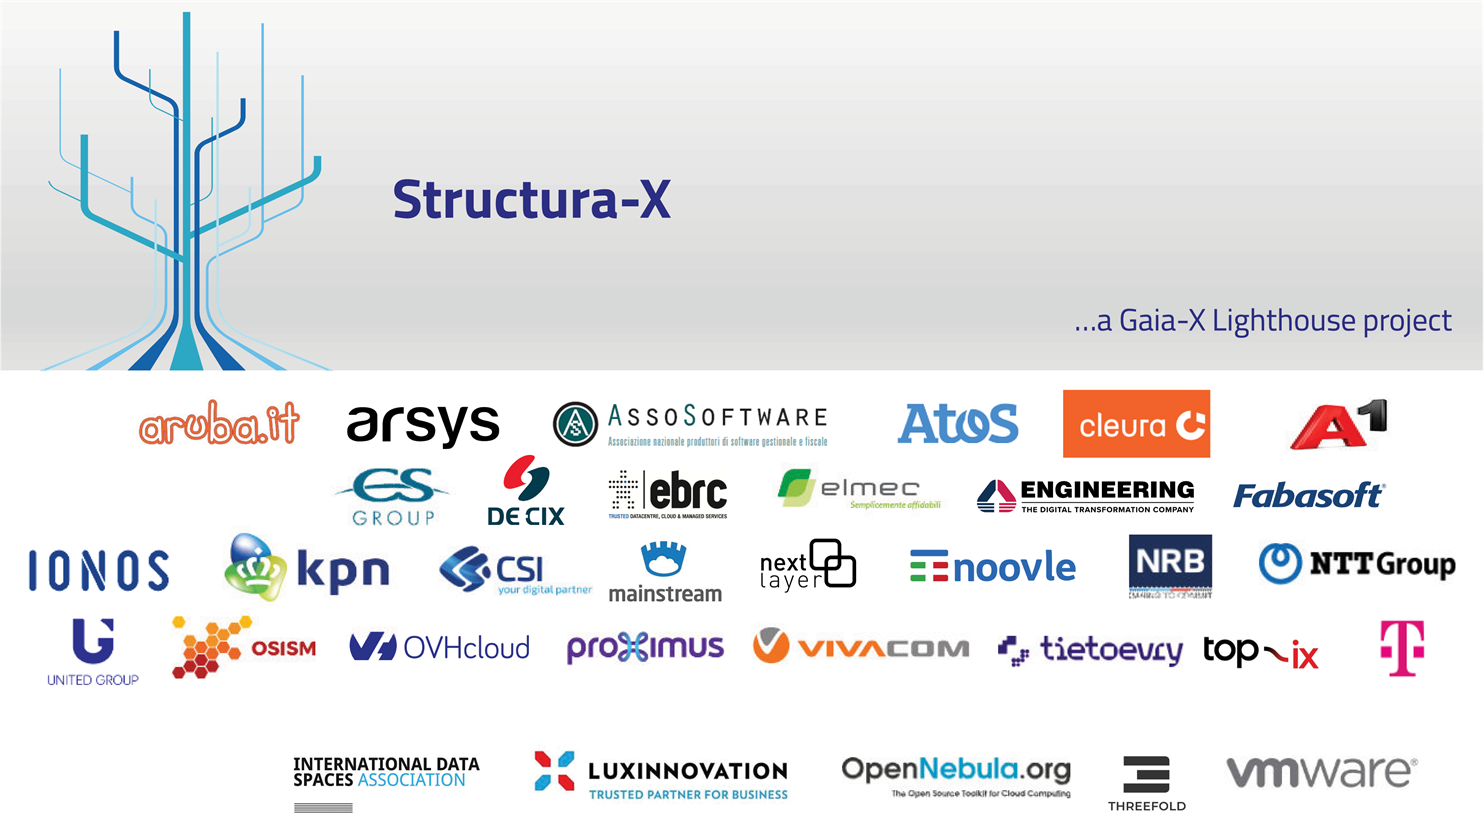 Affiliated companies to Structura-x for European cloud services